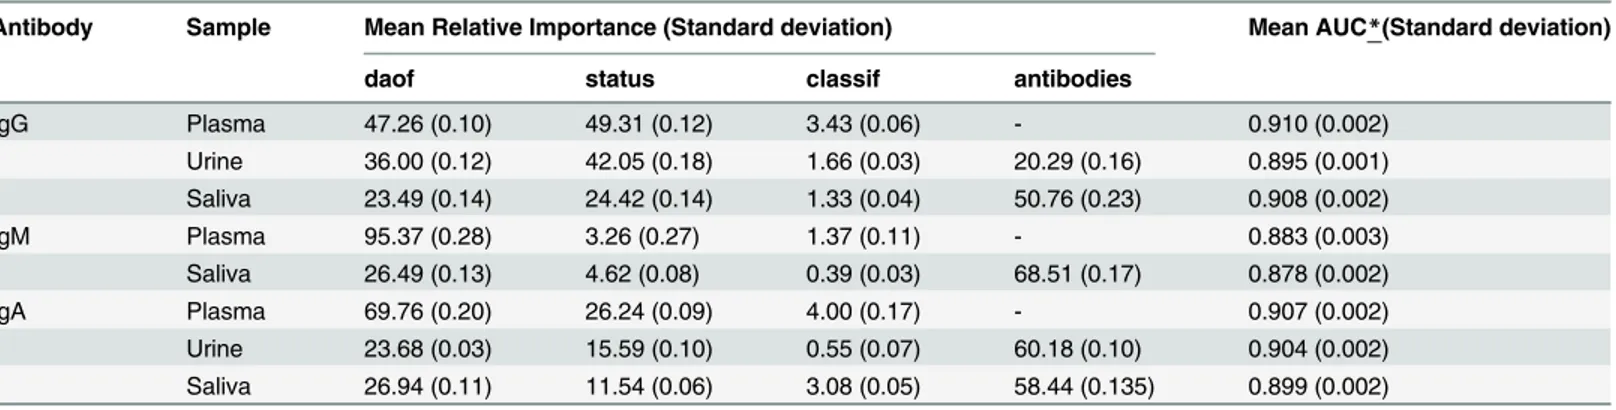 Table 6. Results of the Boosted Regression Trees analysis for the detection of anti-DENV antibodies in plasma, urine and saliva.